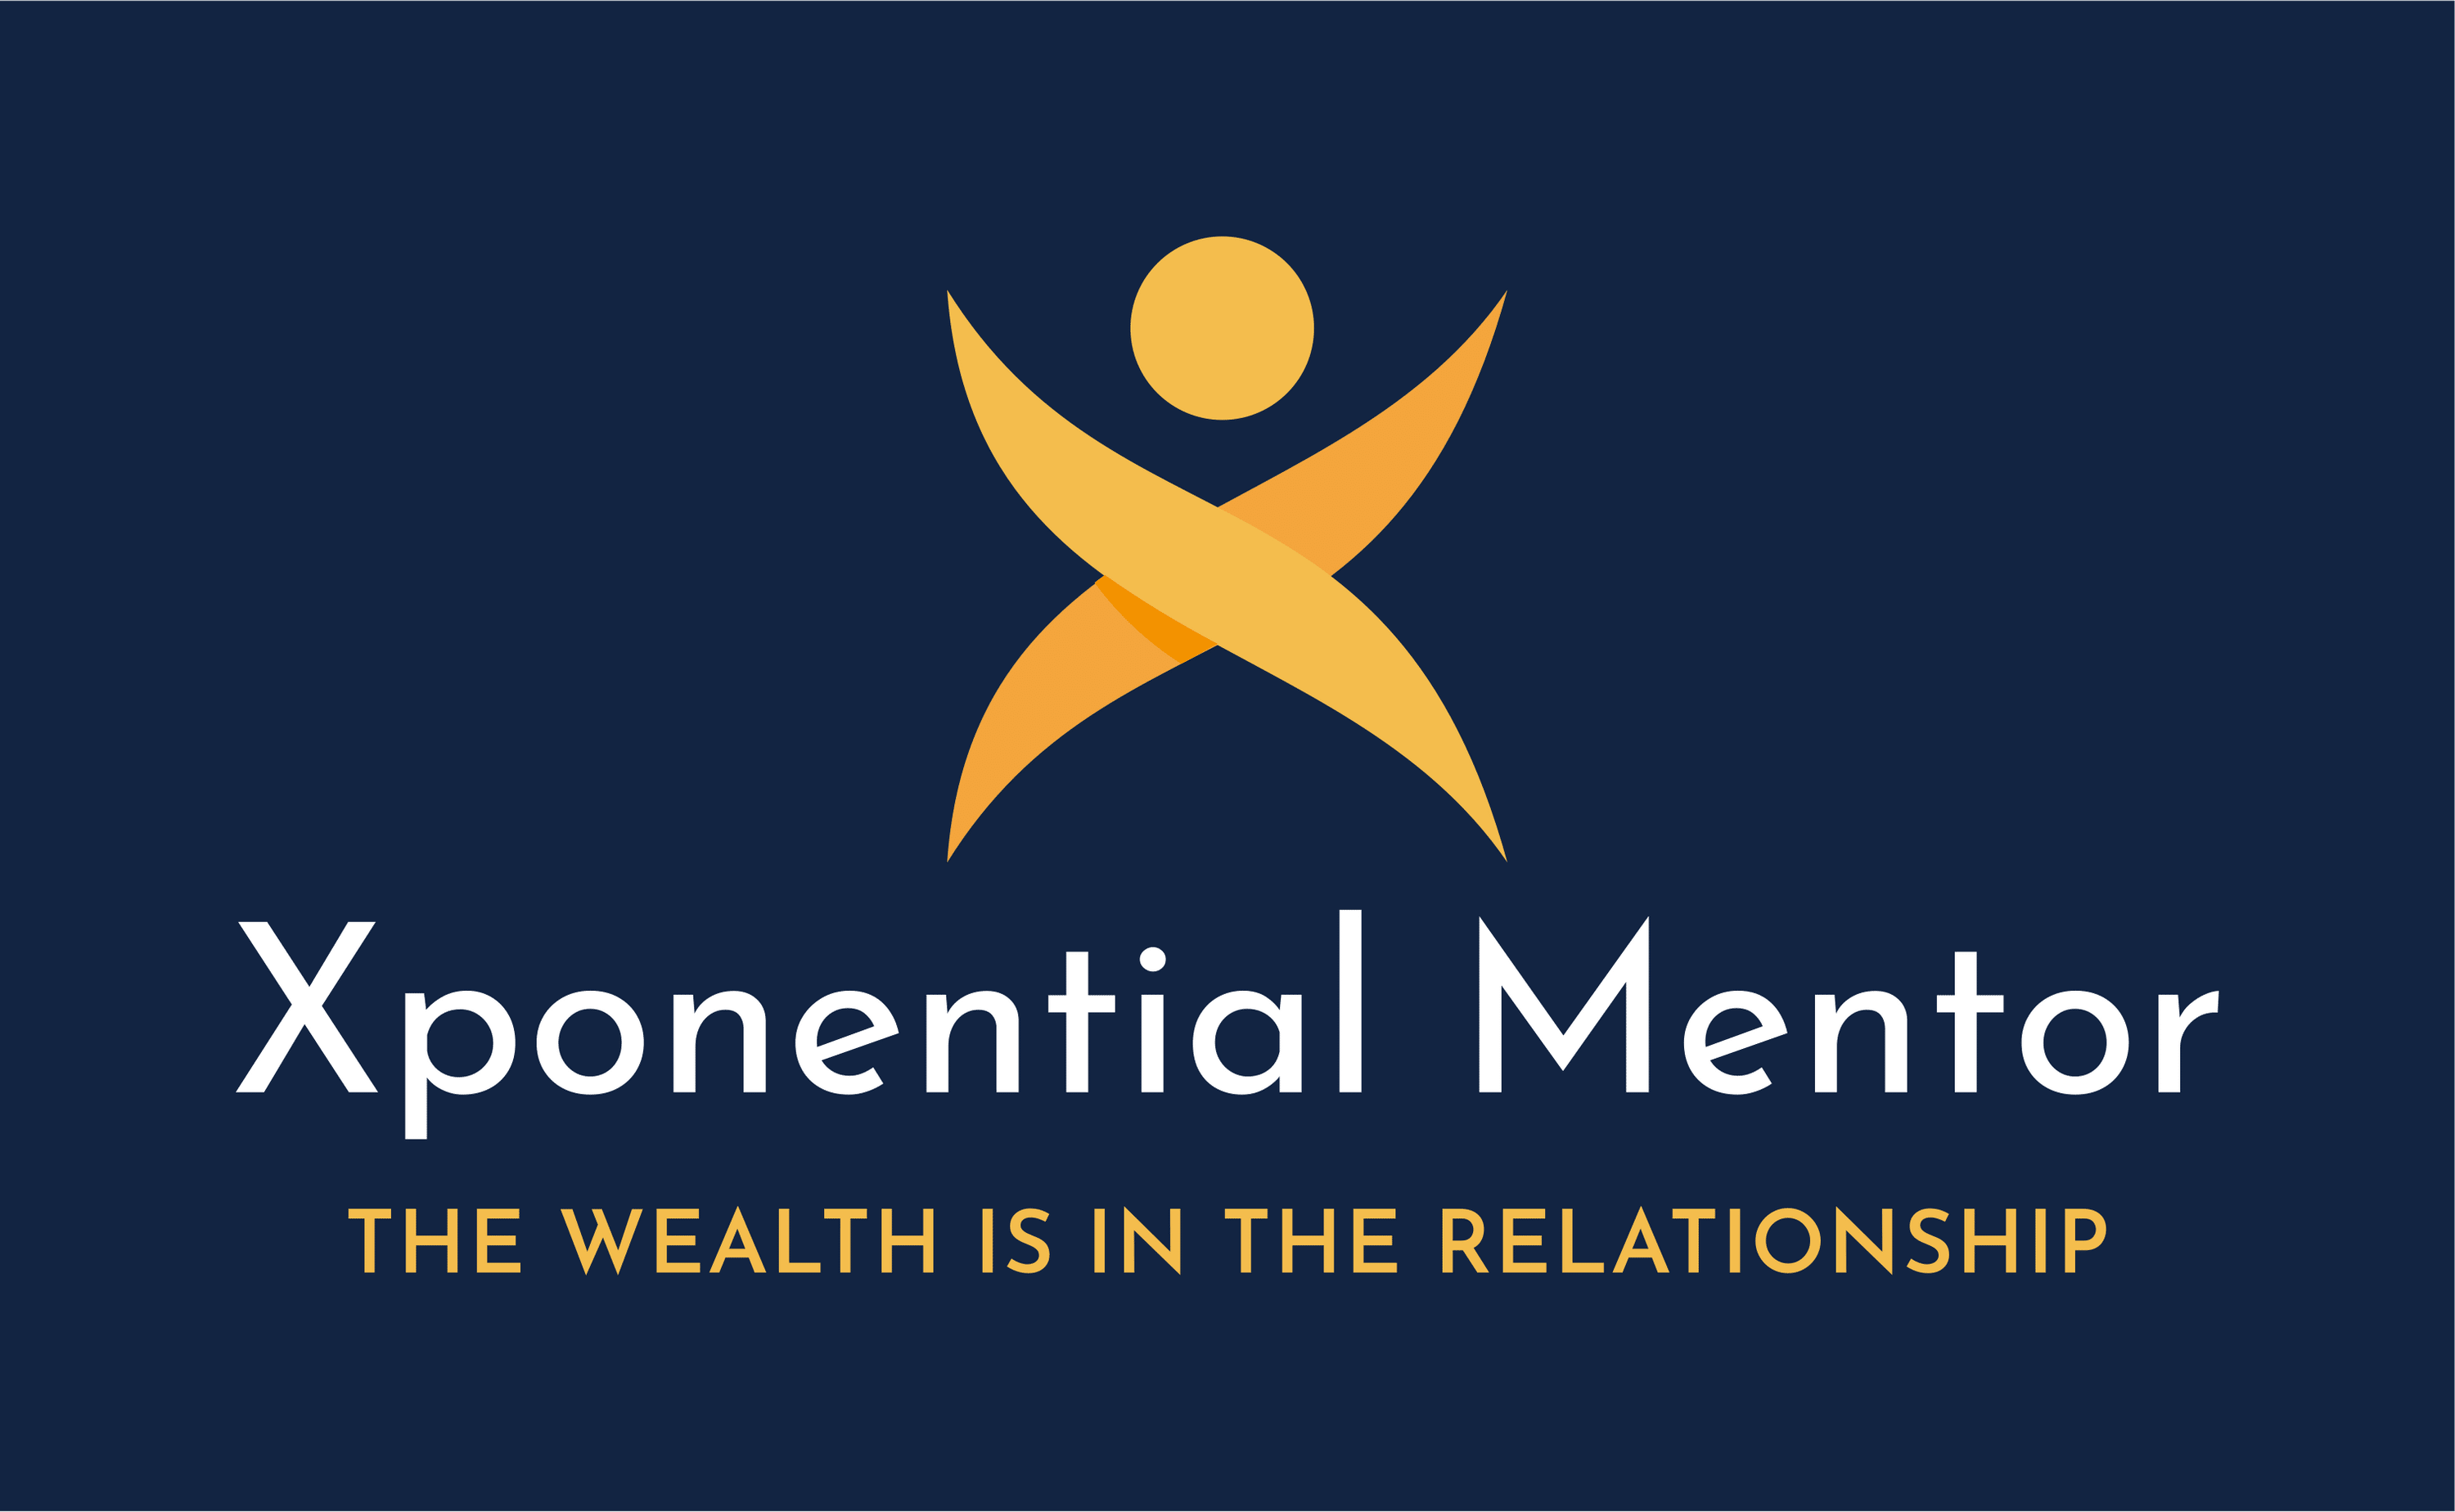 Xponential Mentor, Wealth is in the Relationship